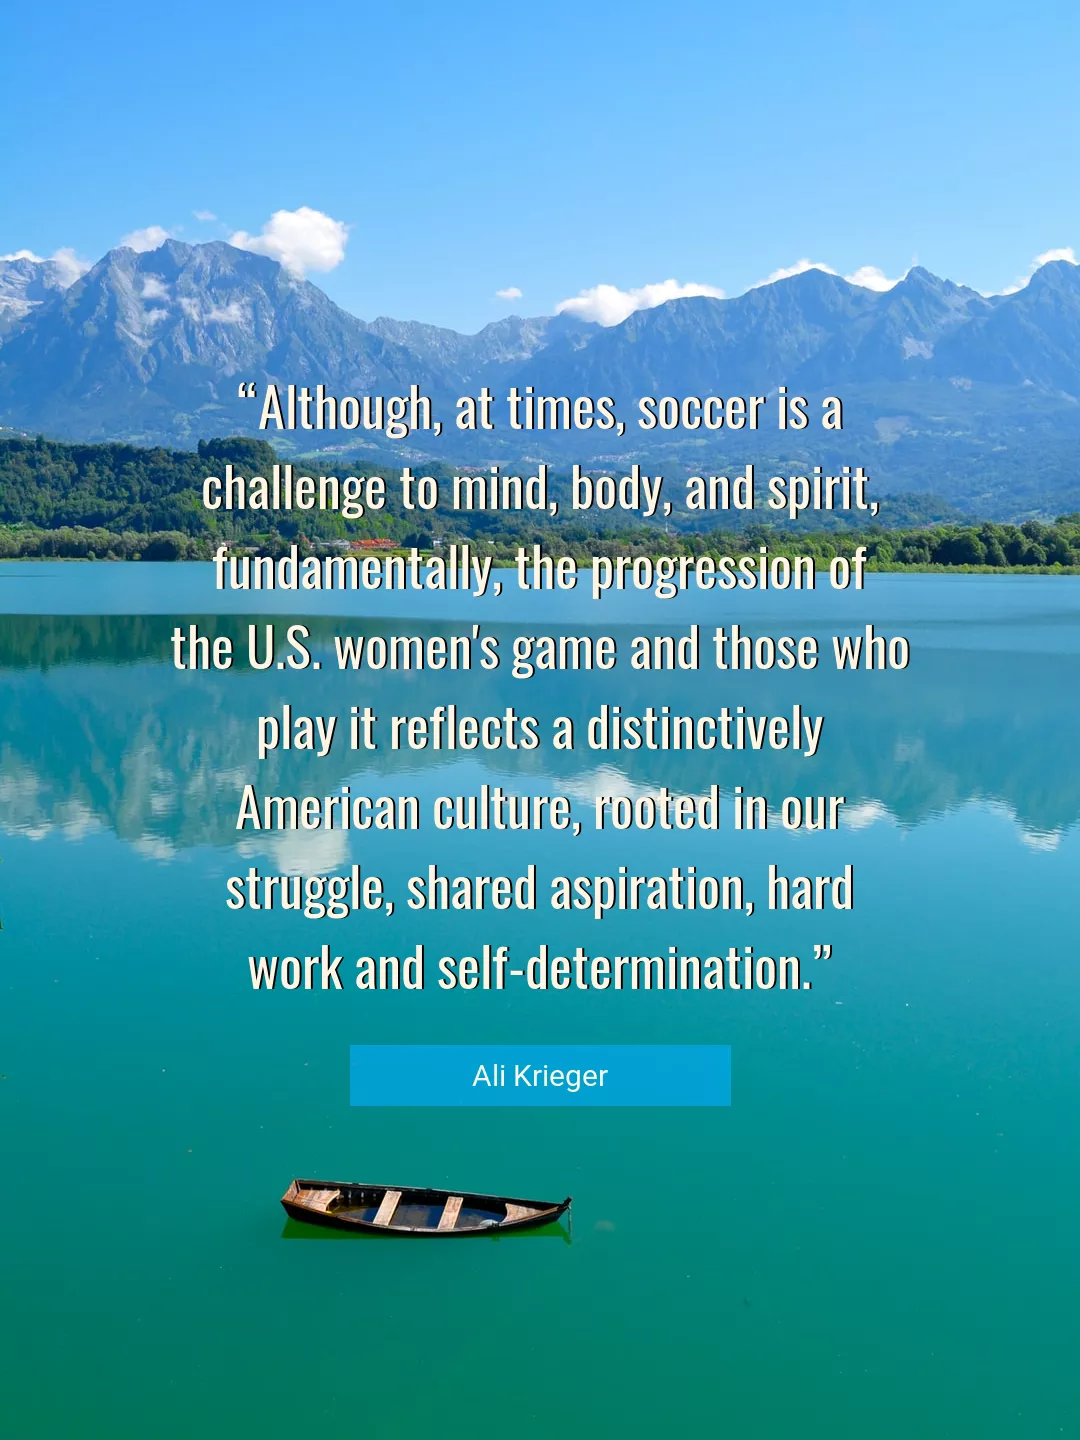 Quote About Work By Ali Krieger